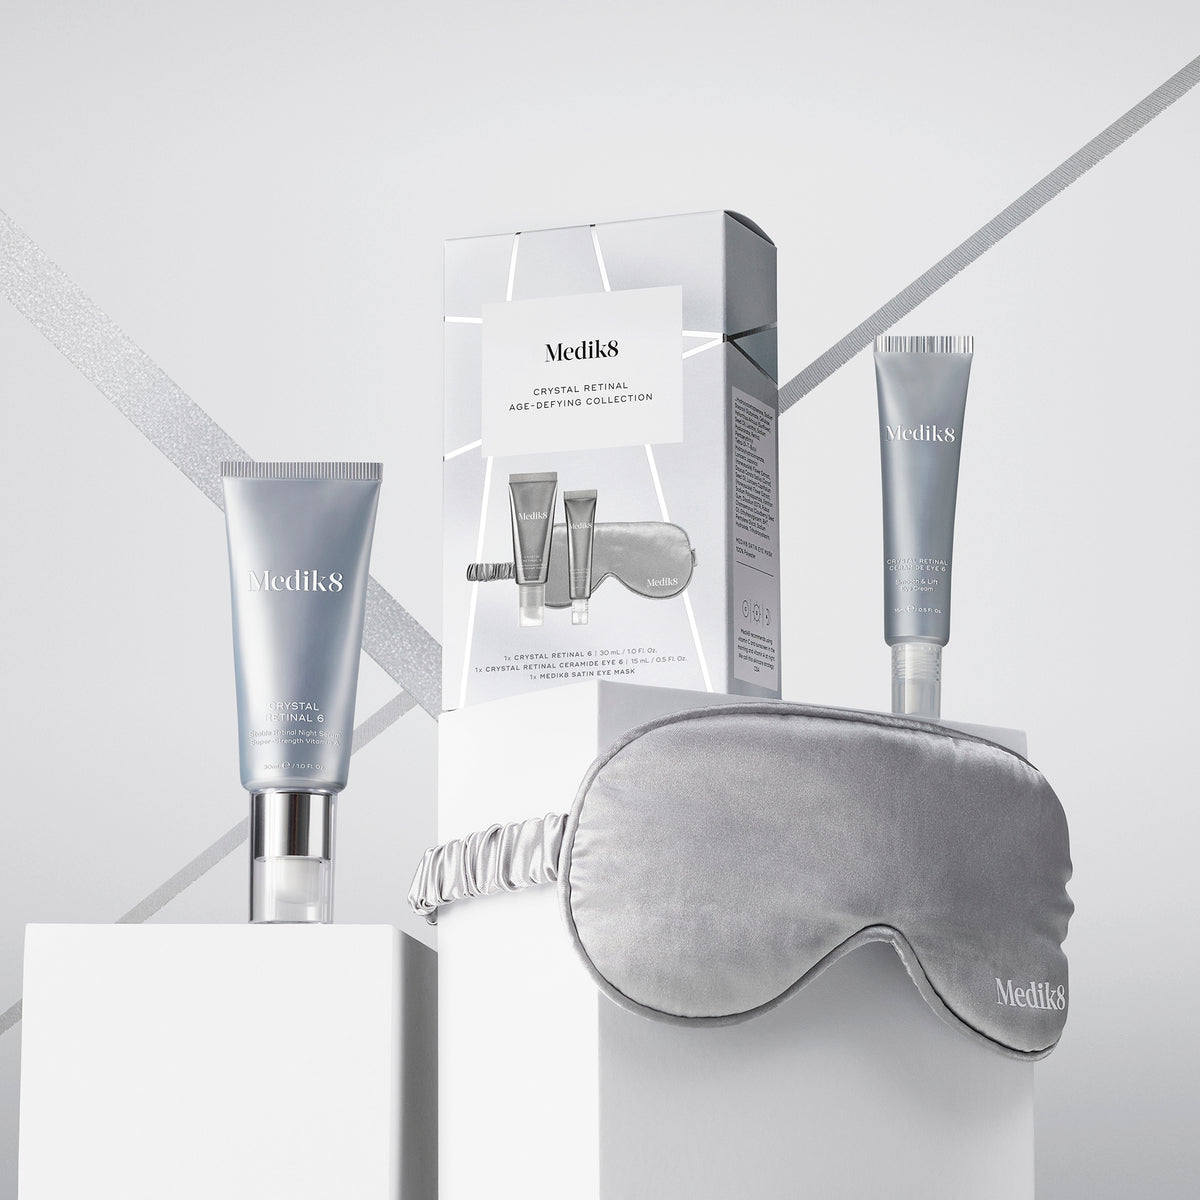 Medik8 Crystal Retinal Age-Defying Limited Edition Collection